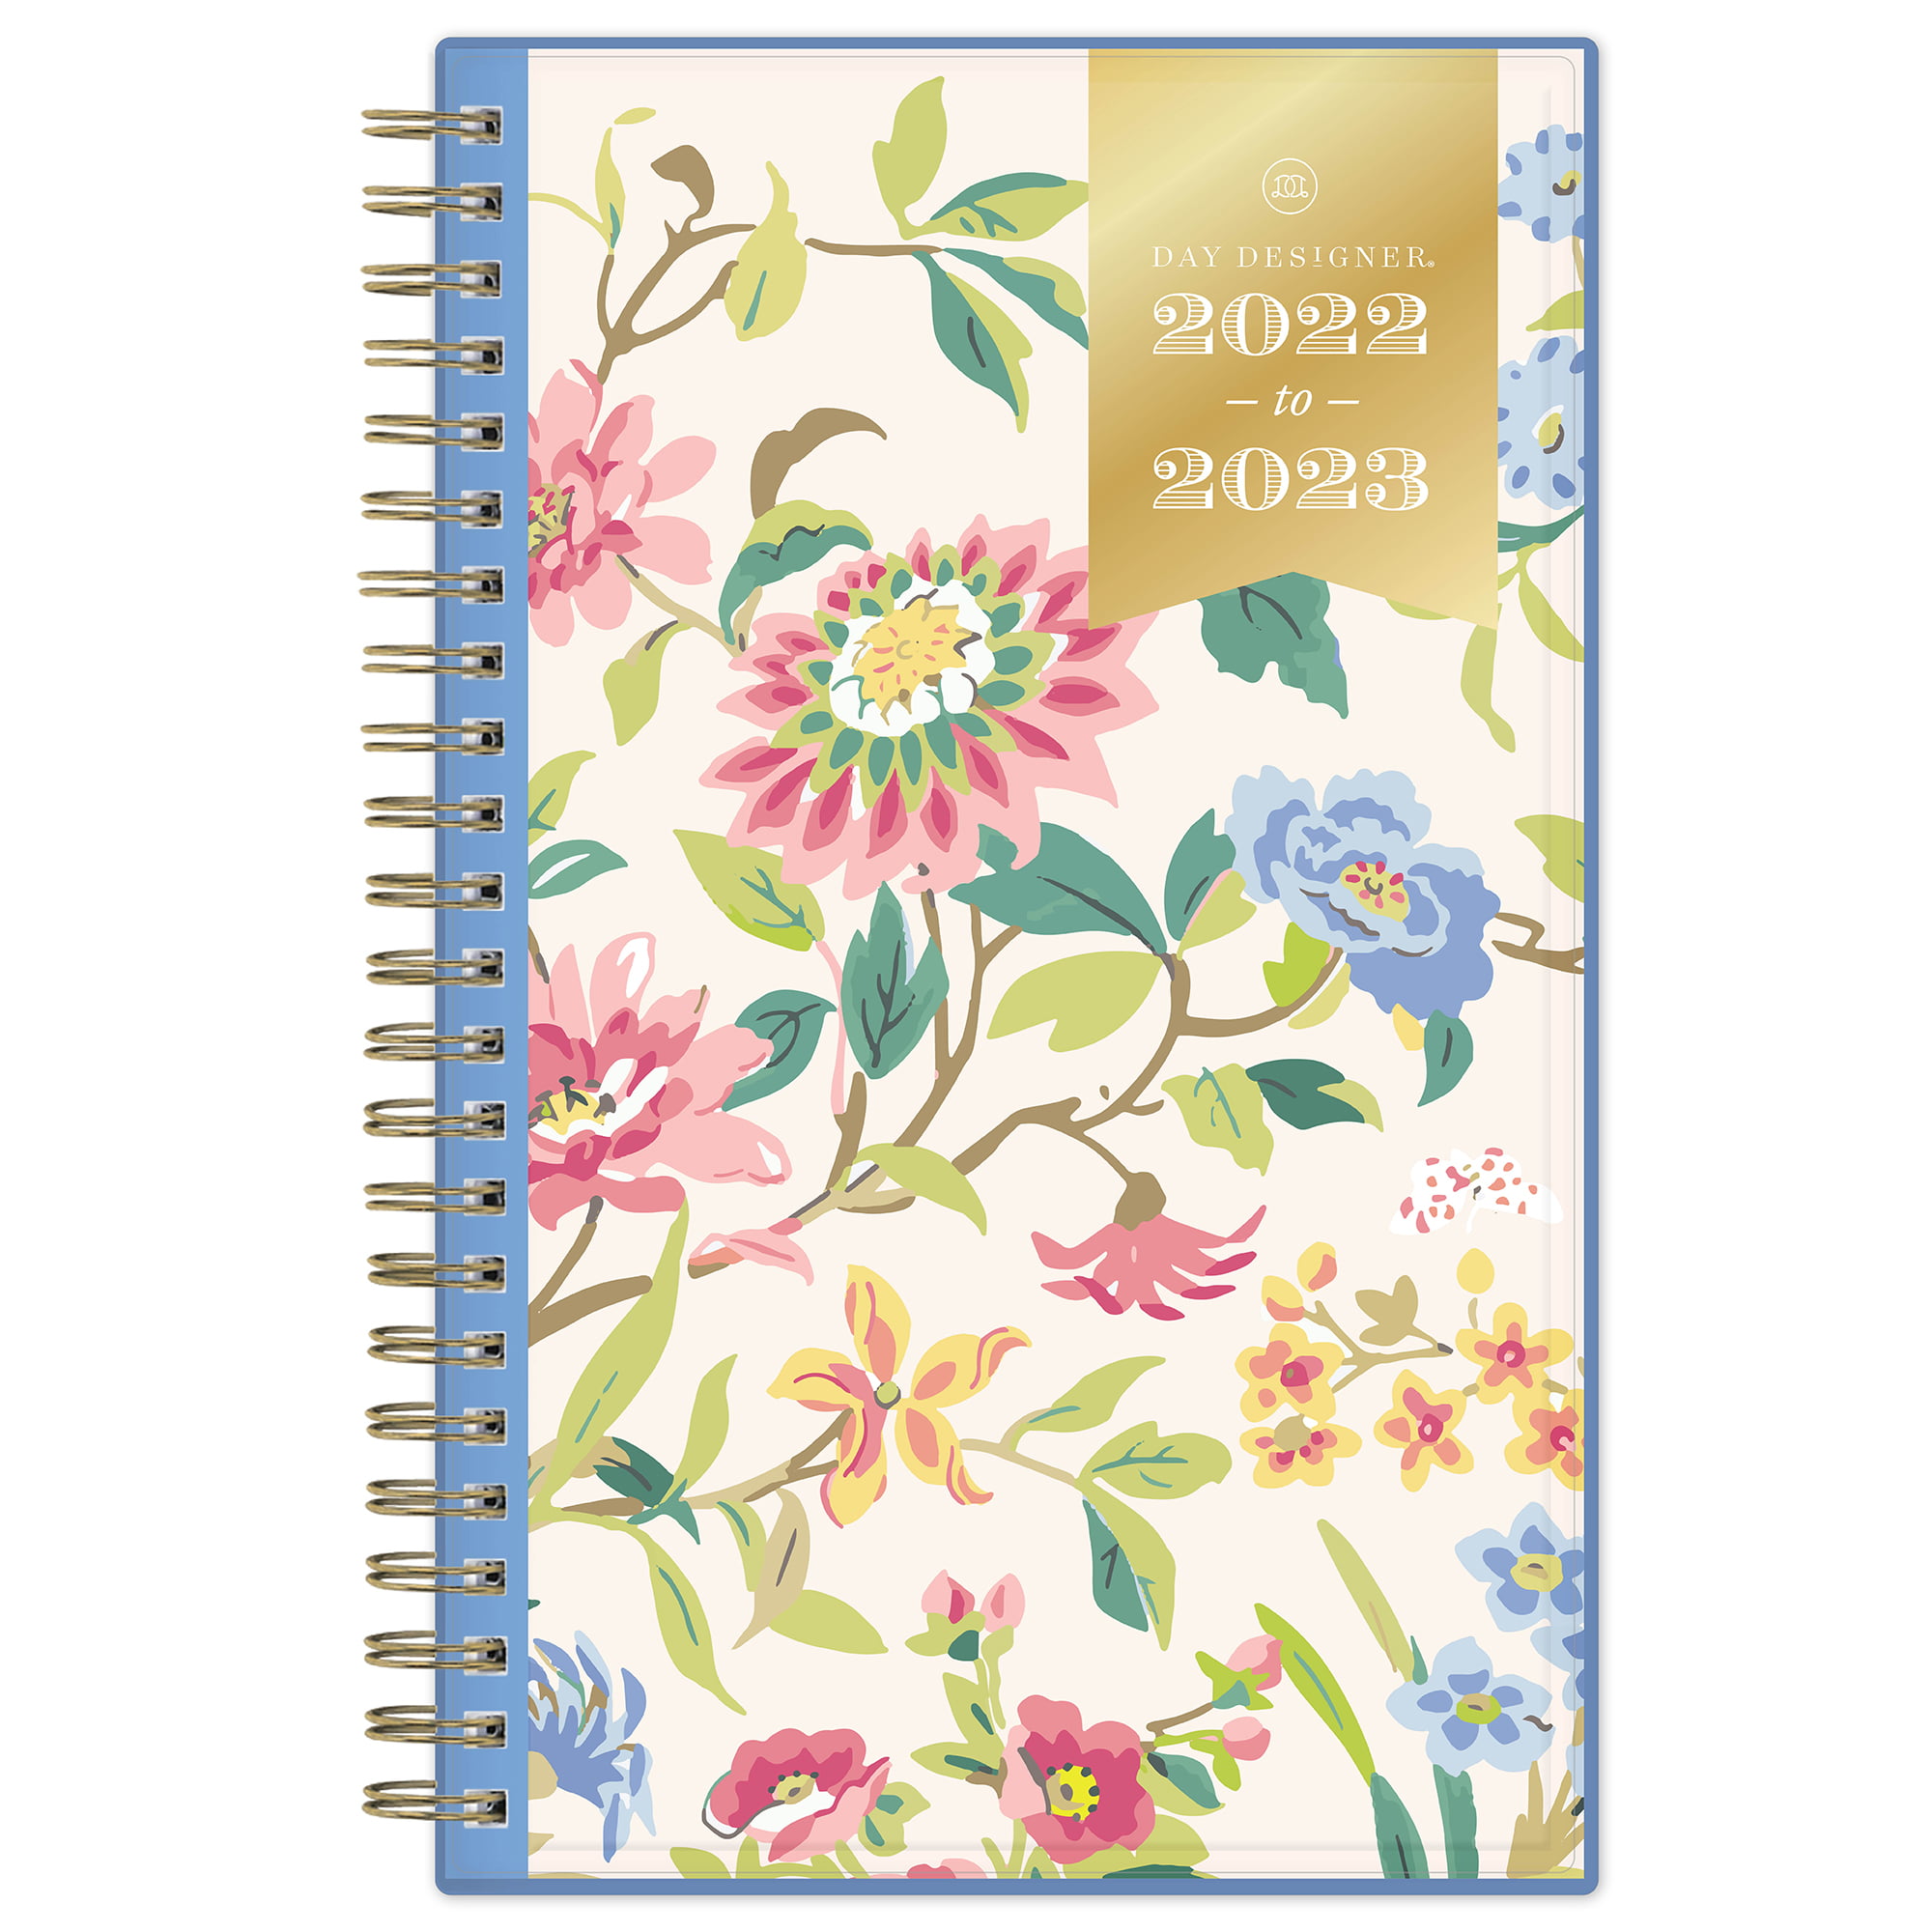 Day Designer 2020 Weekly Monthly Planner aqua 8x5.5 flexible cover tabbed wire 